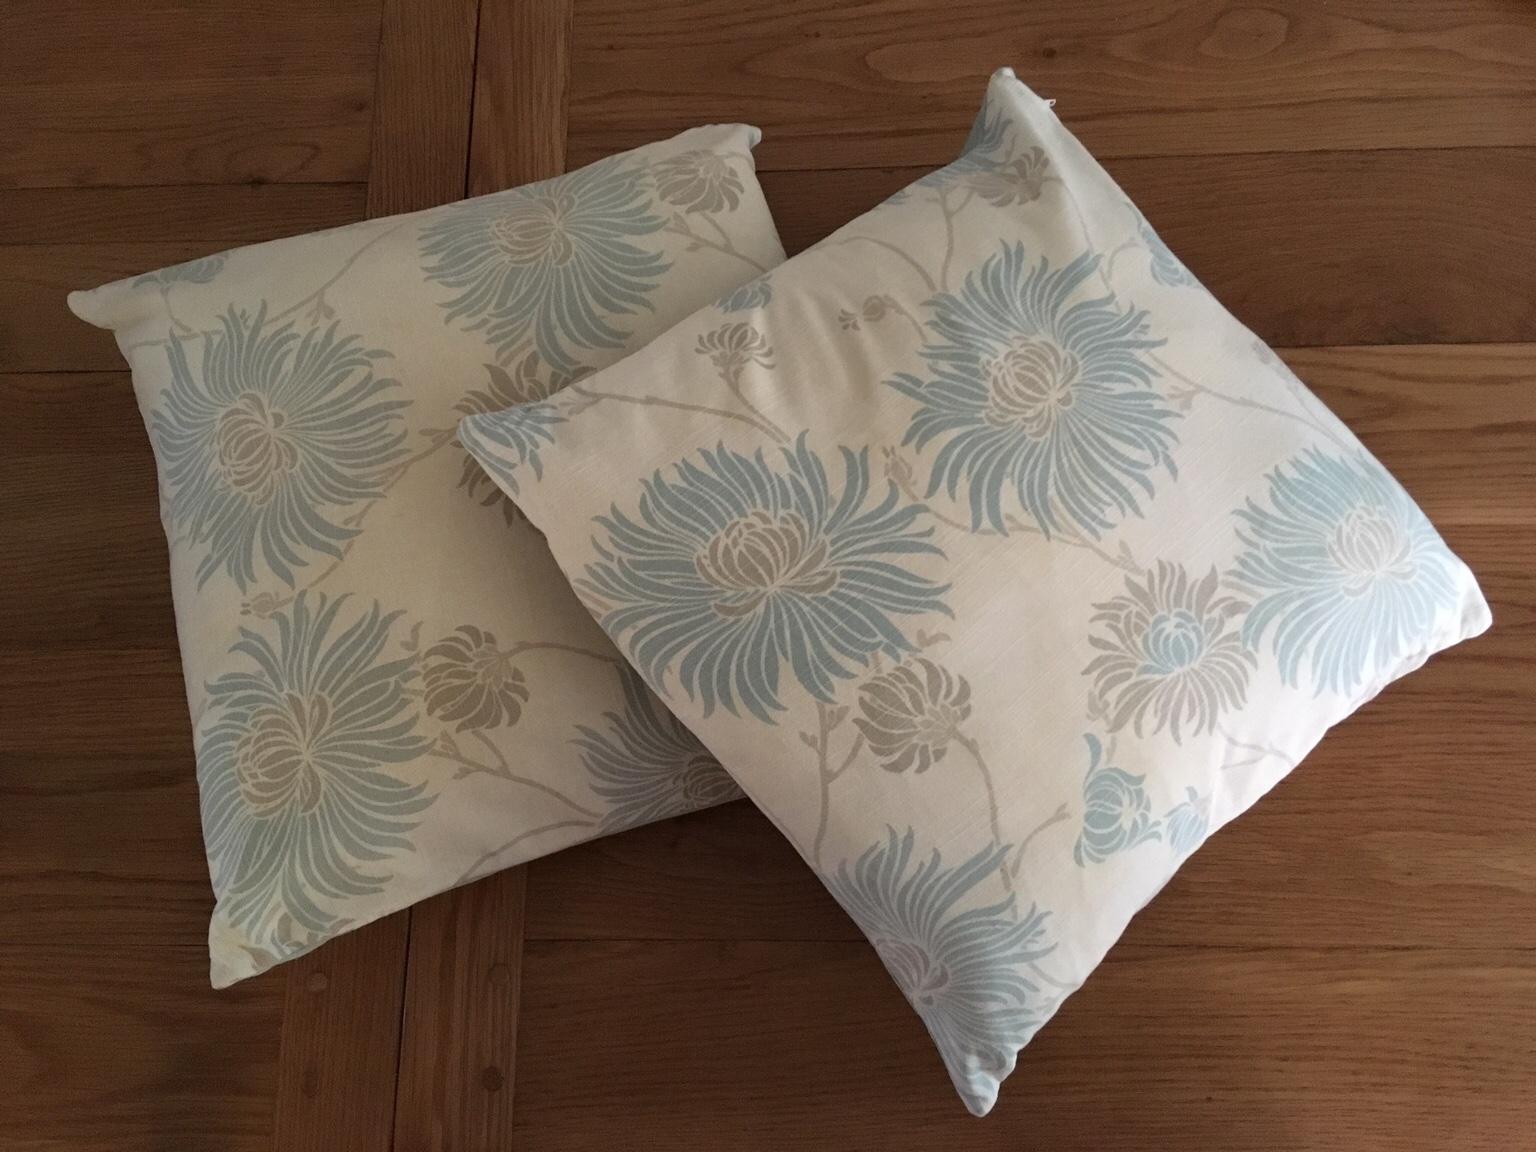 Laura Ashley Cushions X 2 In Kimono Duck Egg In B91 Solihull For 6 00 For Sale Shpock You'll receive email and feed alerts when new items arrive. shpock